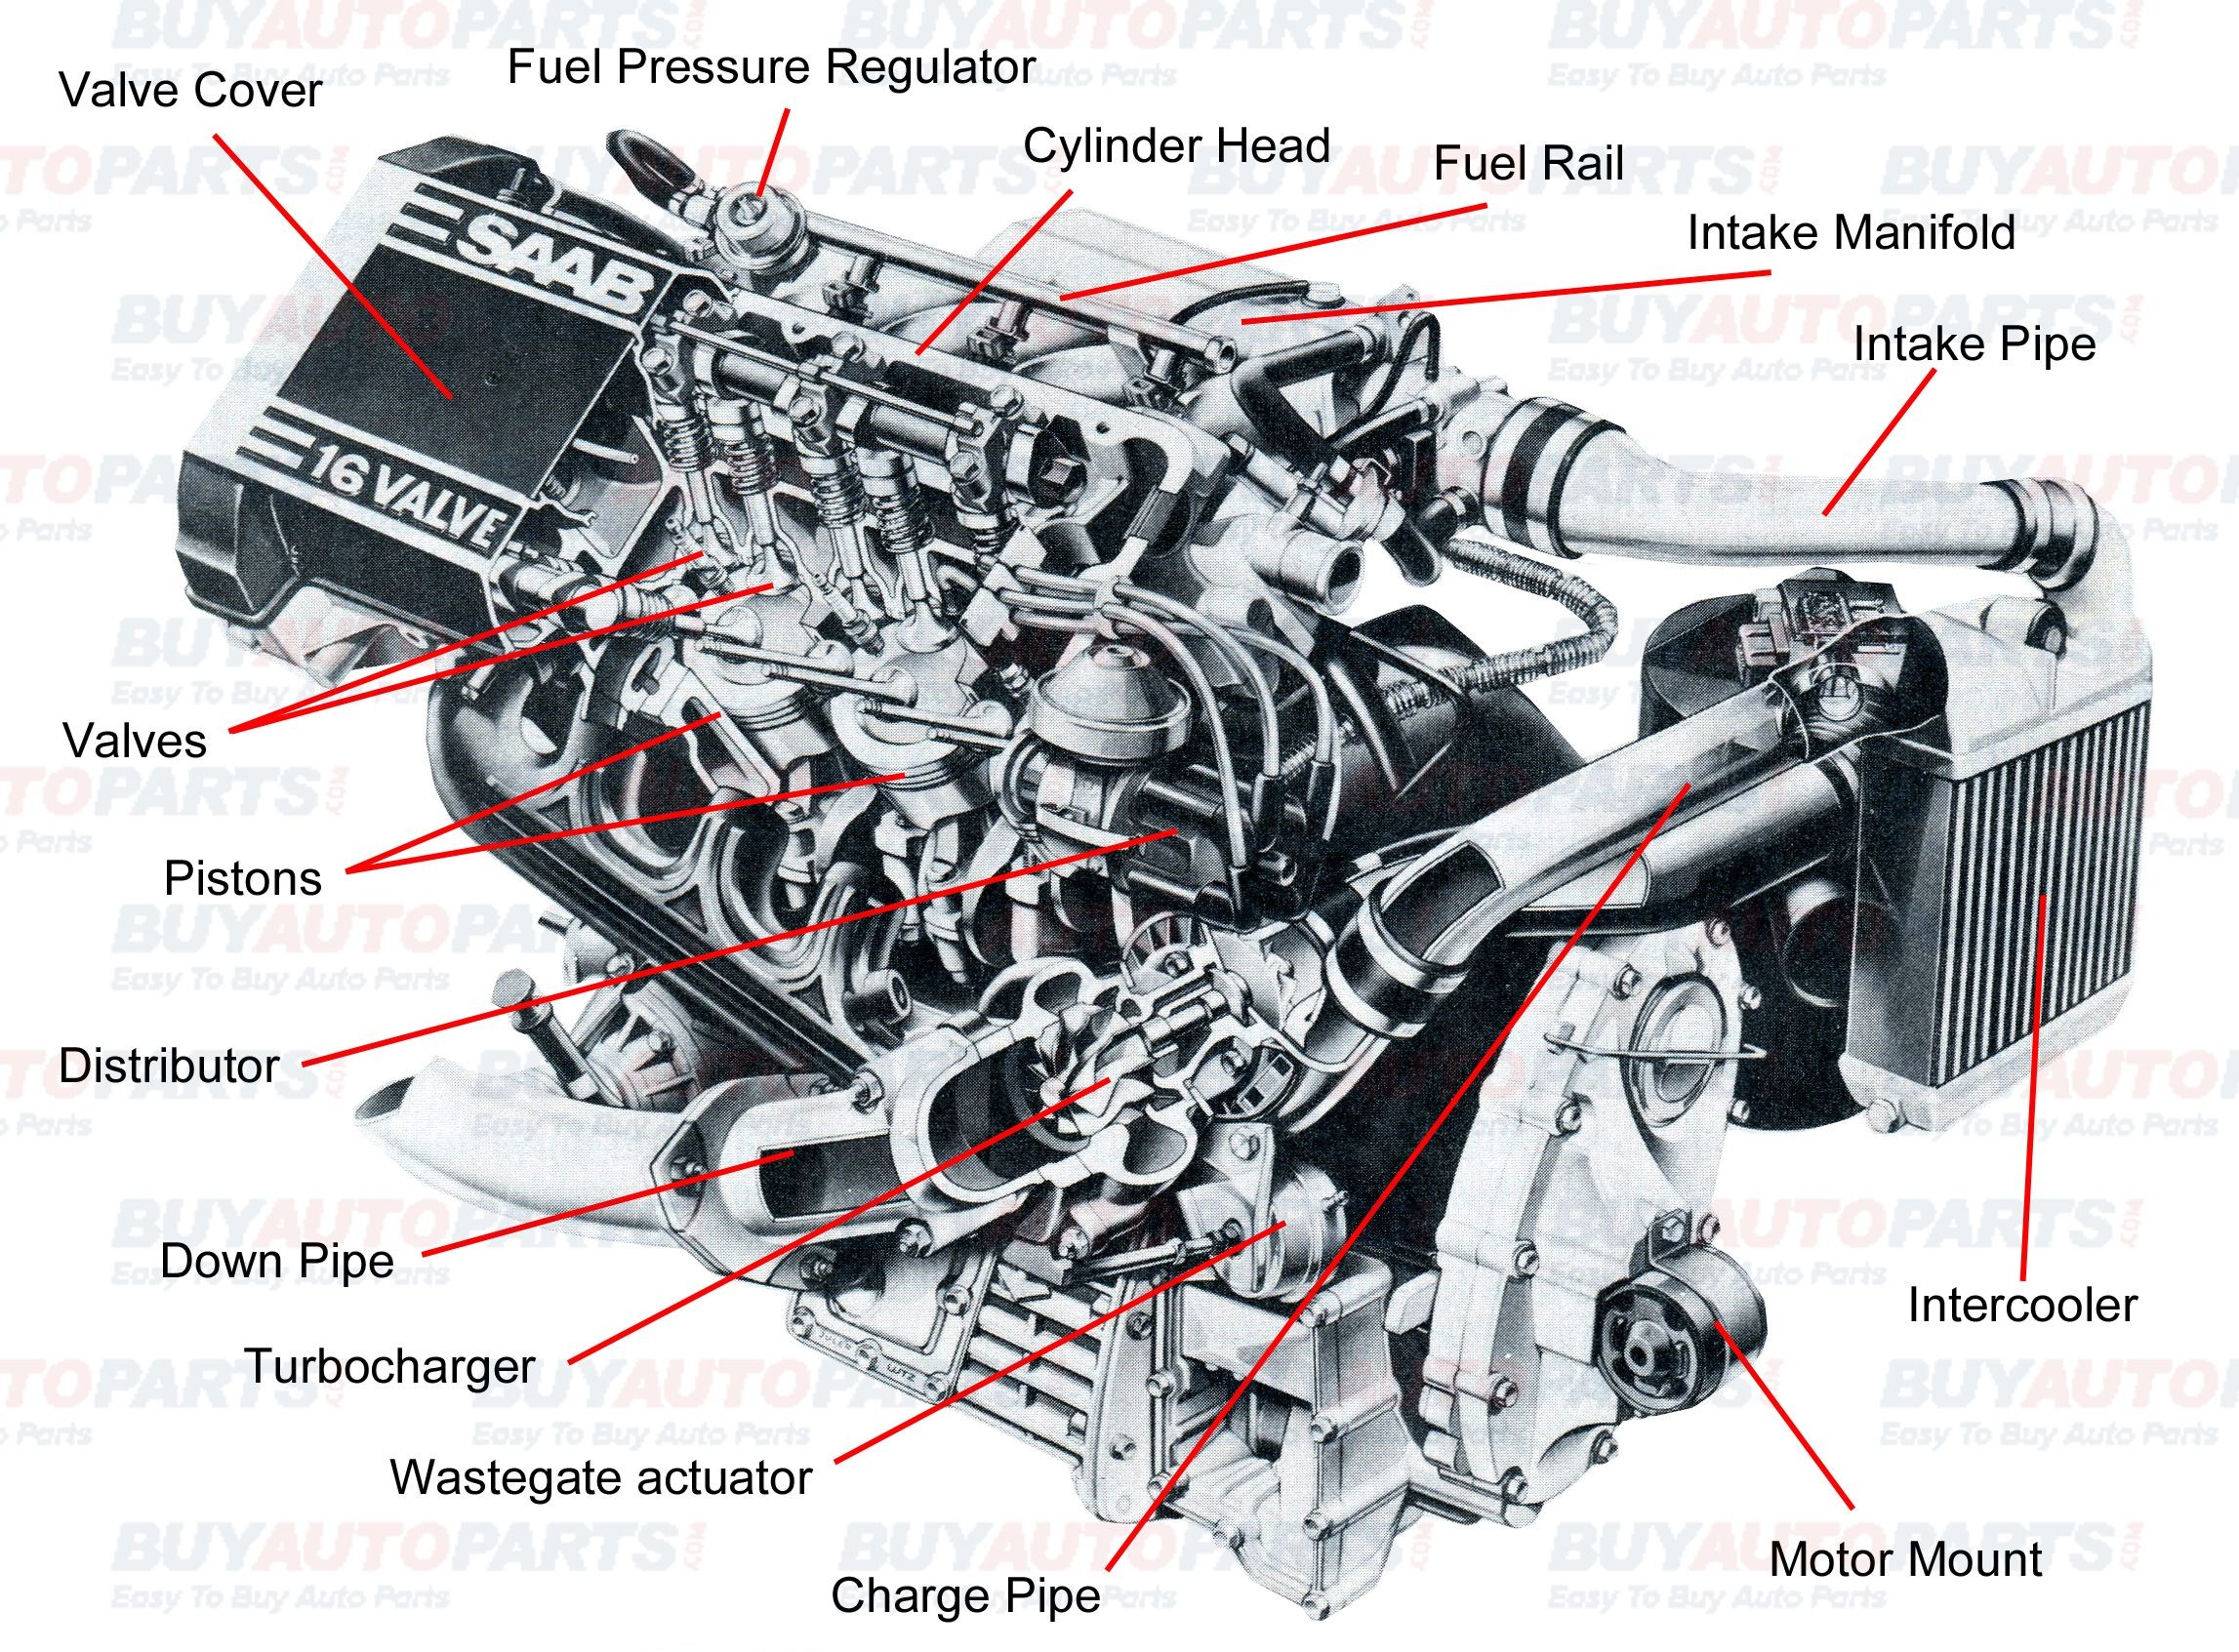 How Do Car Engines Work Diagram Pin by Jimmiejanet Testellamwfz On What Does An Engine with Turbo Of How Do Car Engines Work Diagram